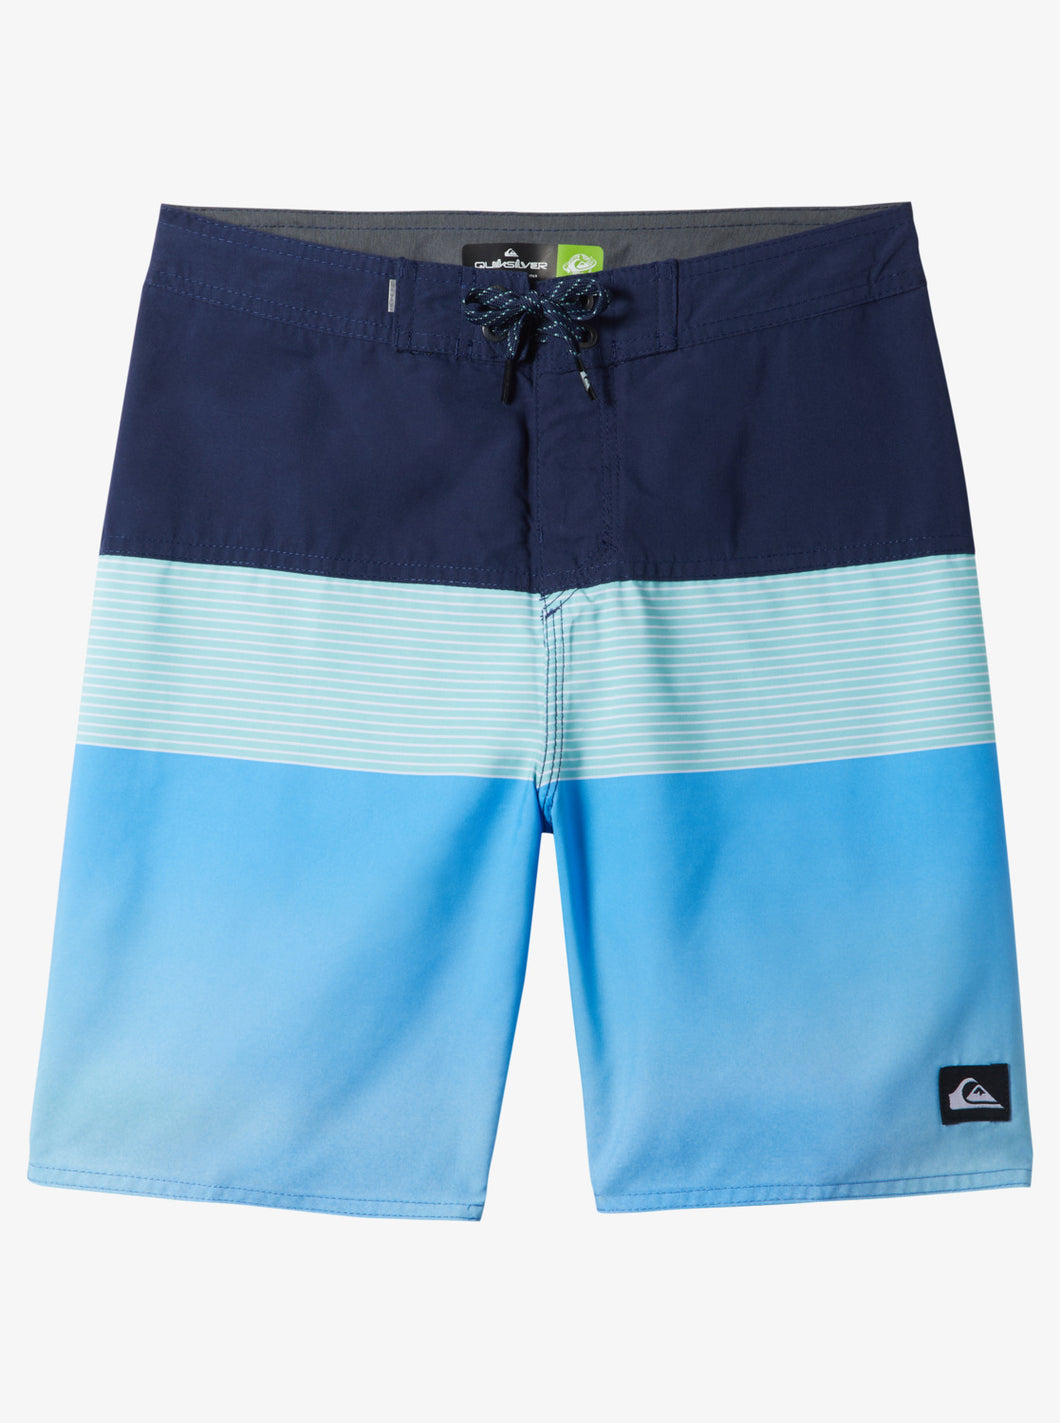 Quiksilver Everyday Panel Youth Boys Board shorts